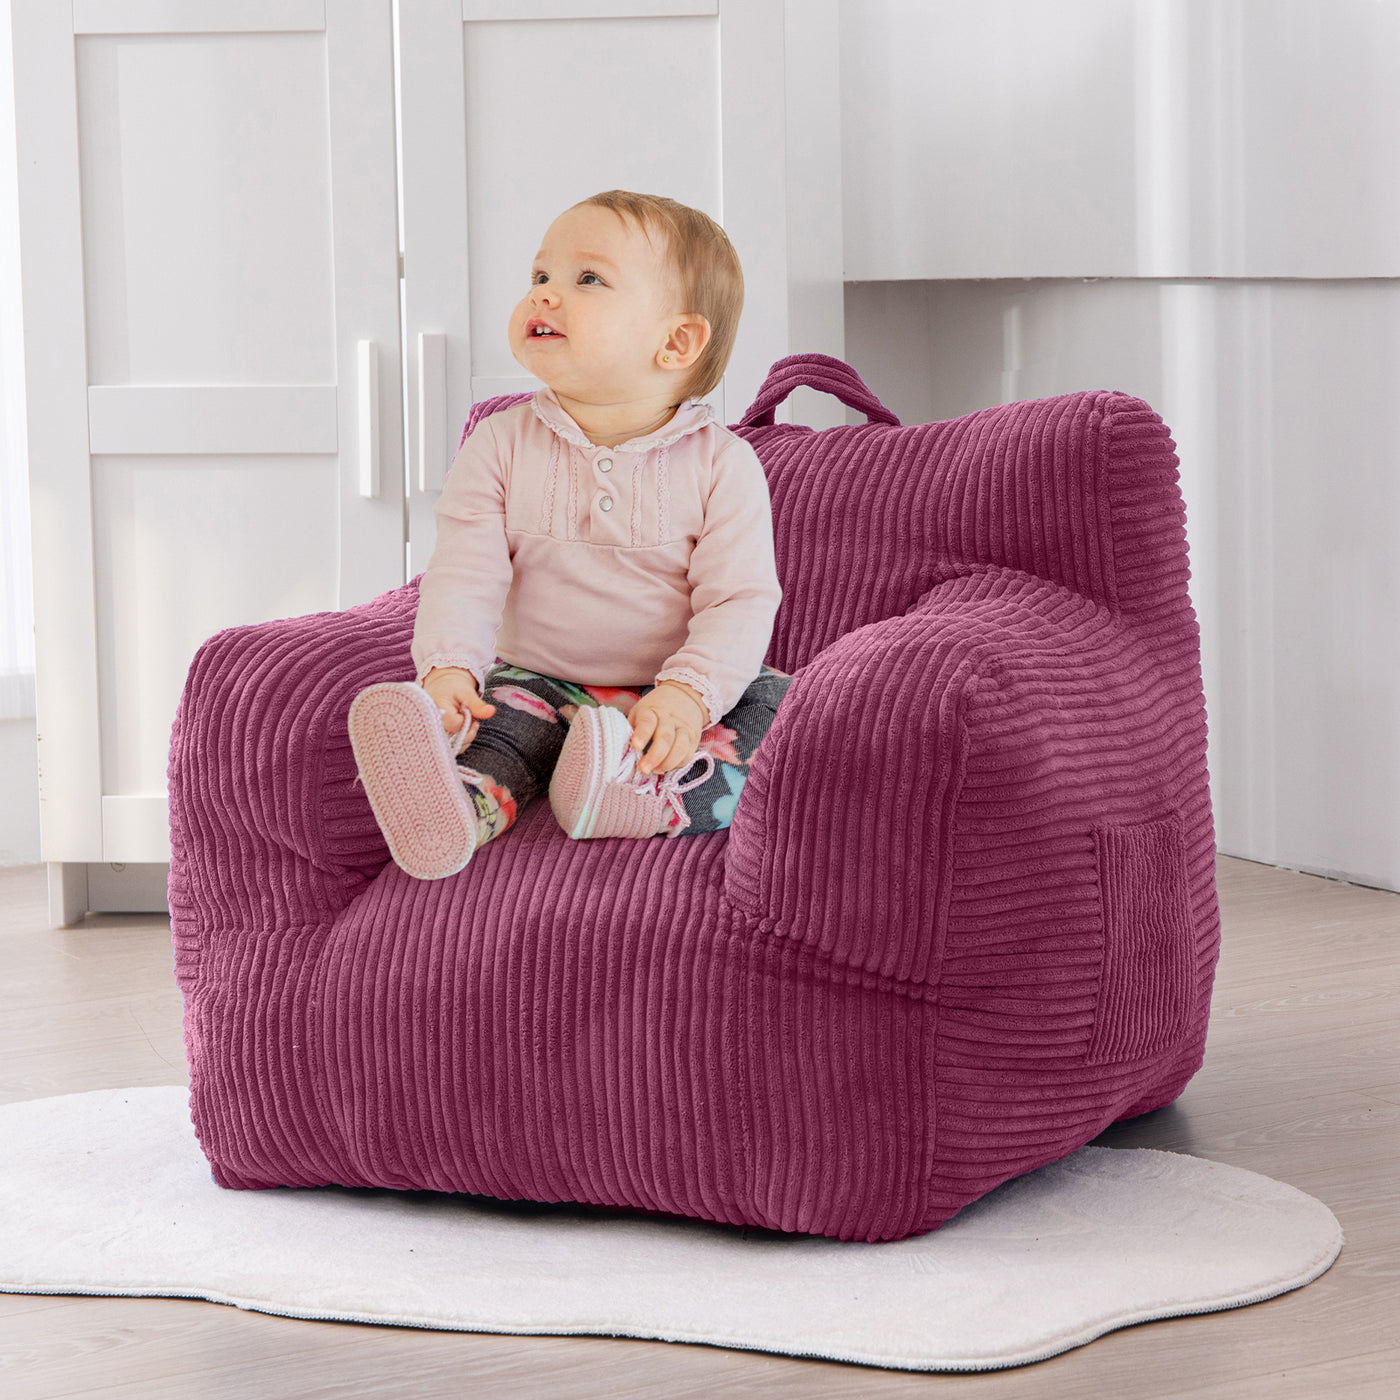 MAXYOYO Kids Bean Bag Chair, Corduroy Bean Bag Couch with Armrests for Children's Room (Rose Pink)